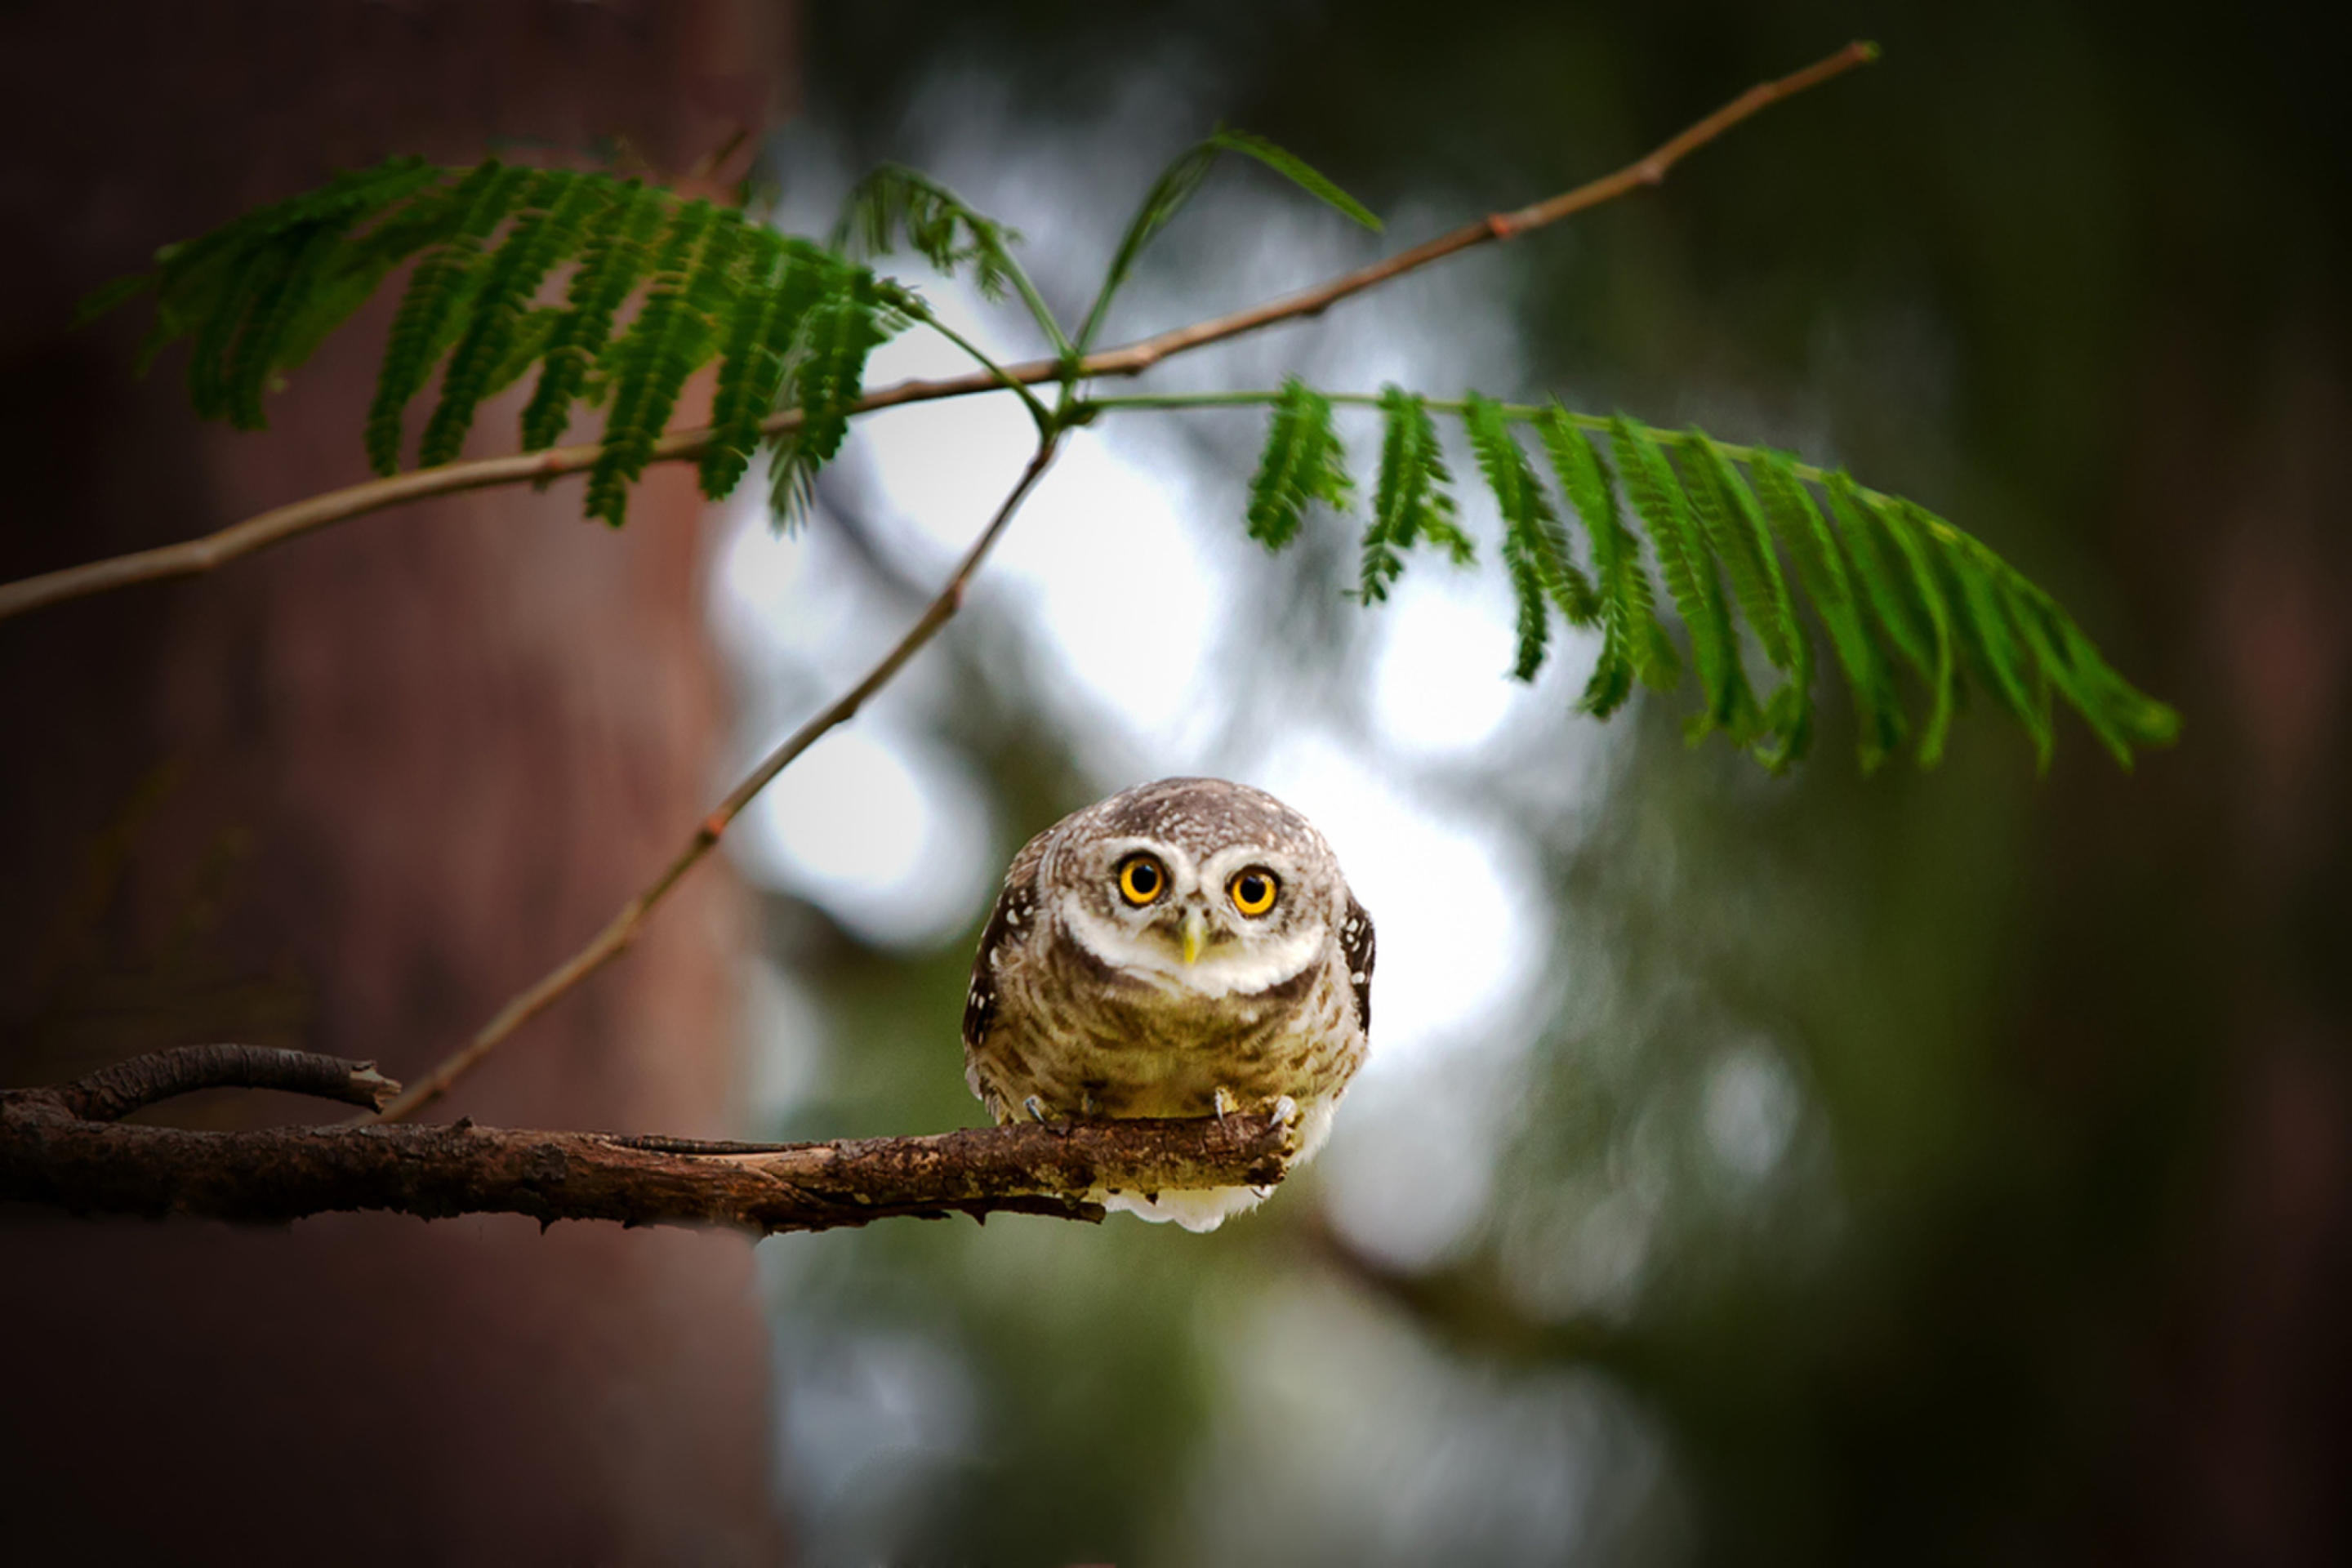 Cute And Funny Little Owl With Big Eyes screenshot #1 2880x1920